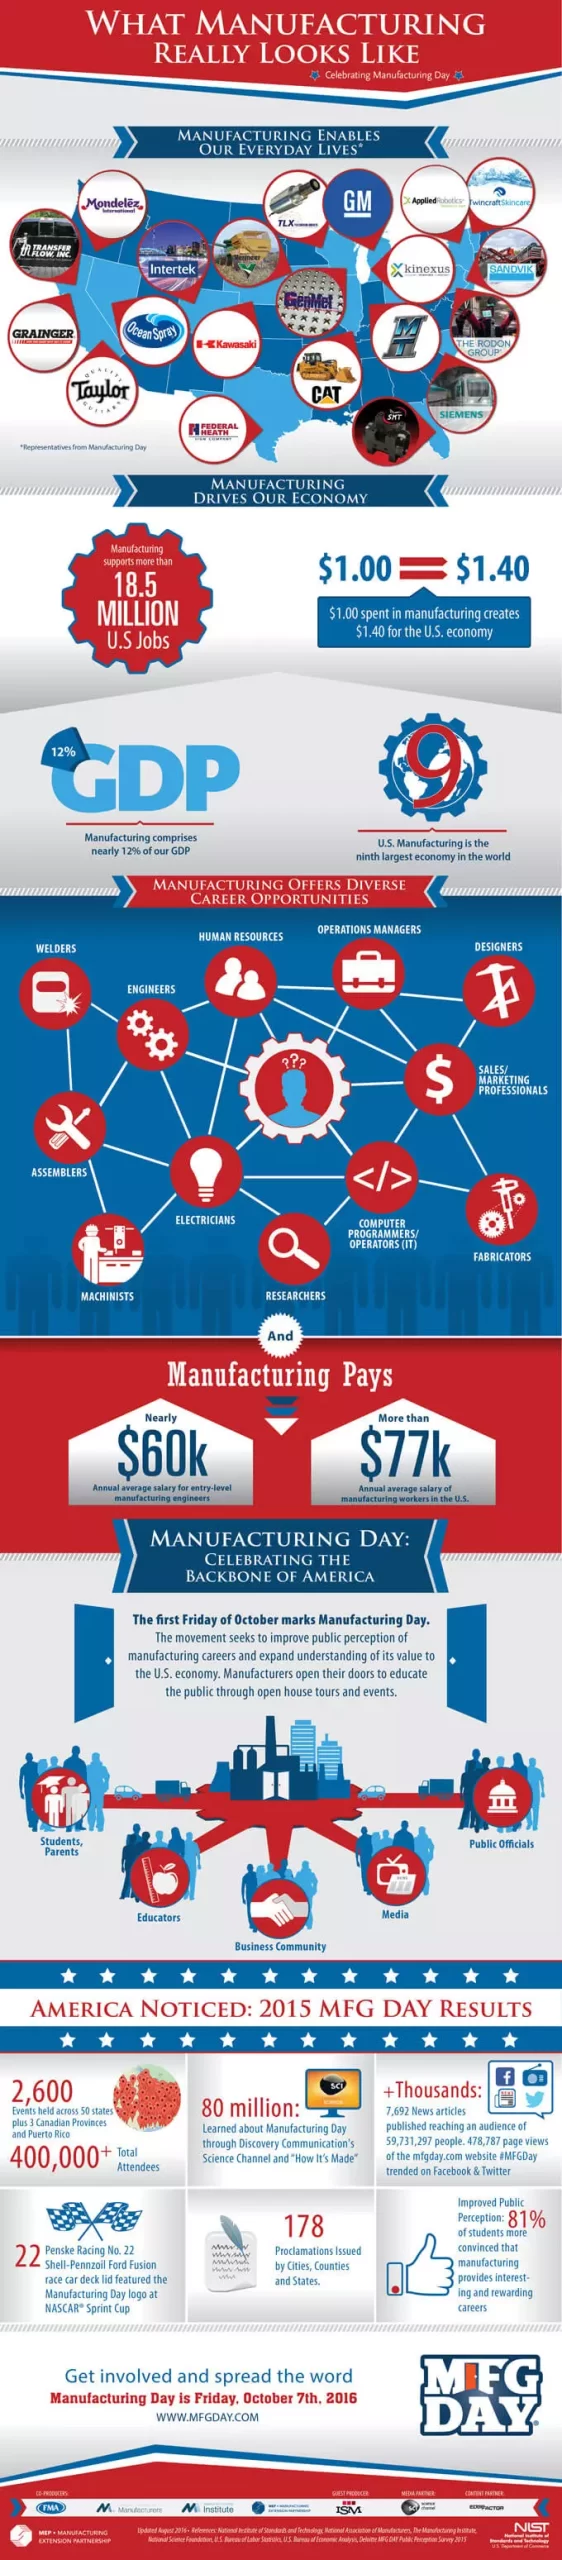 infographic-what-manufacturing-really-looks-like-scaled.webp